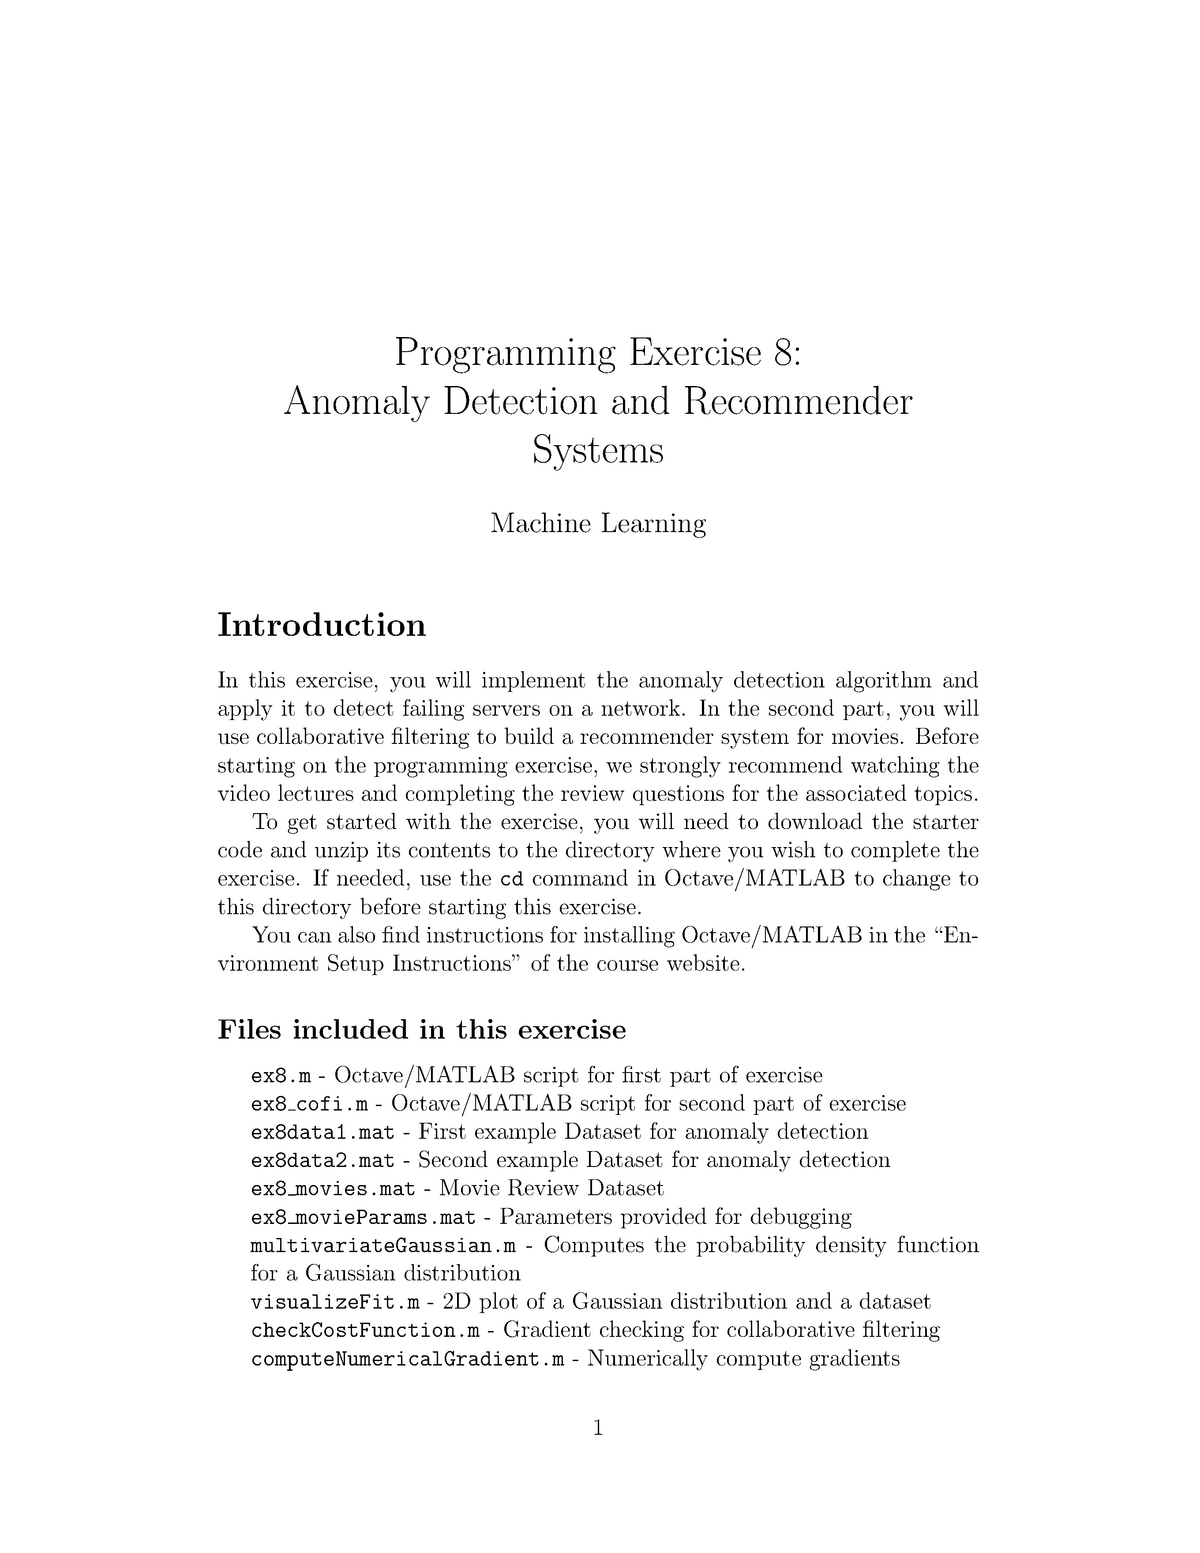 programming assignment anomaly detection and recommender systems